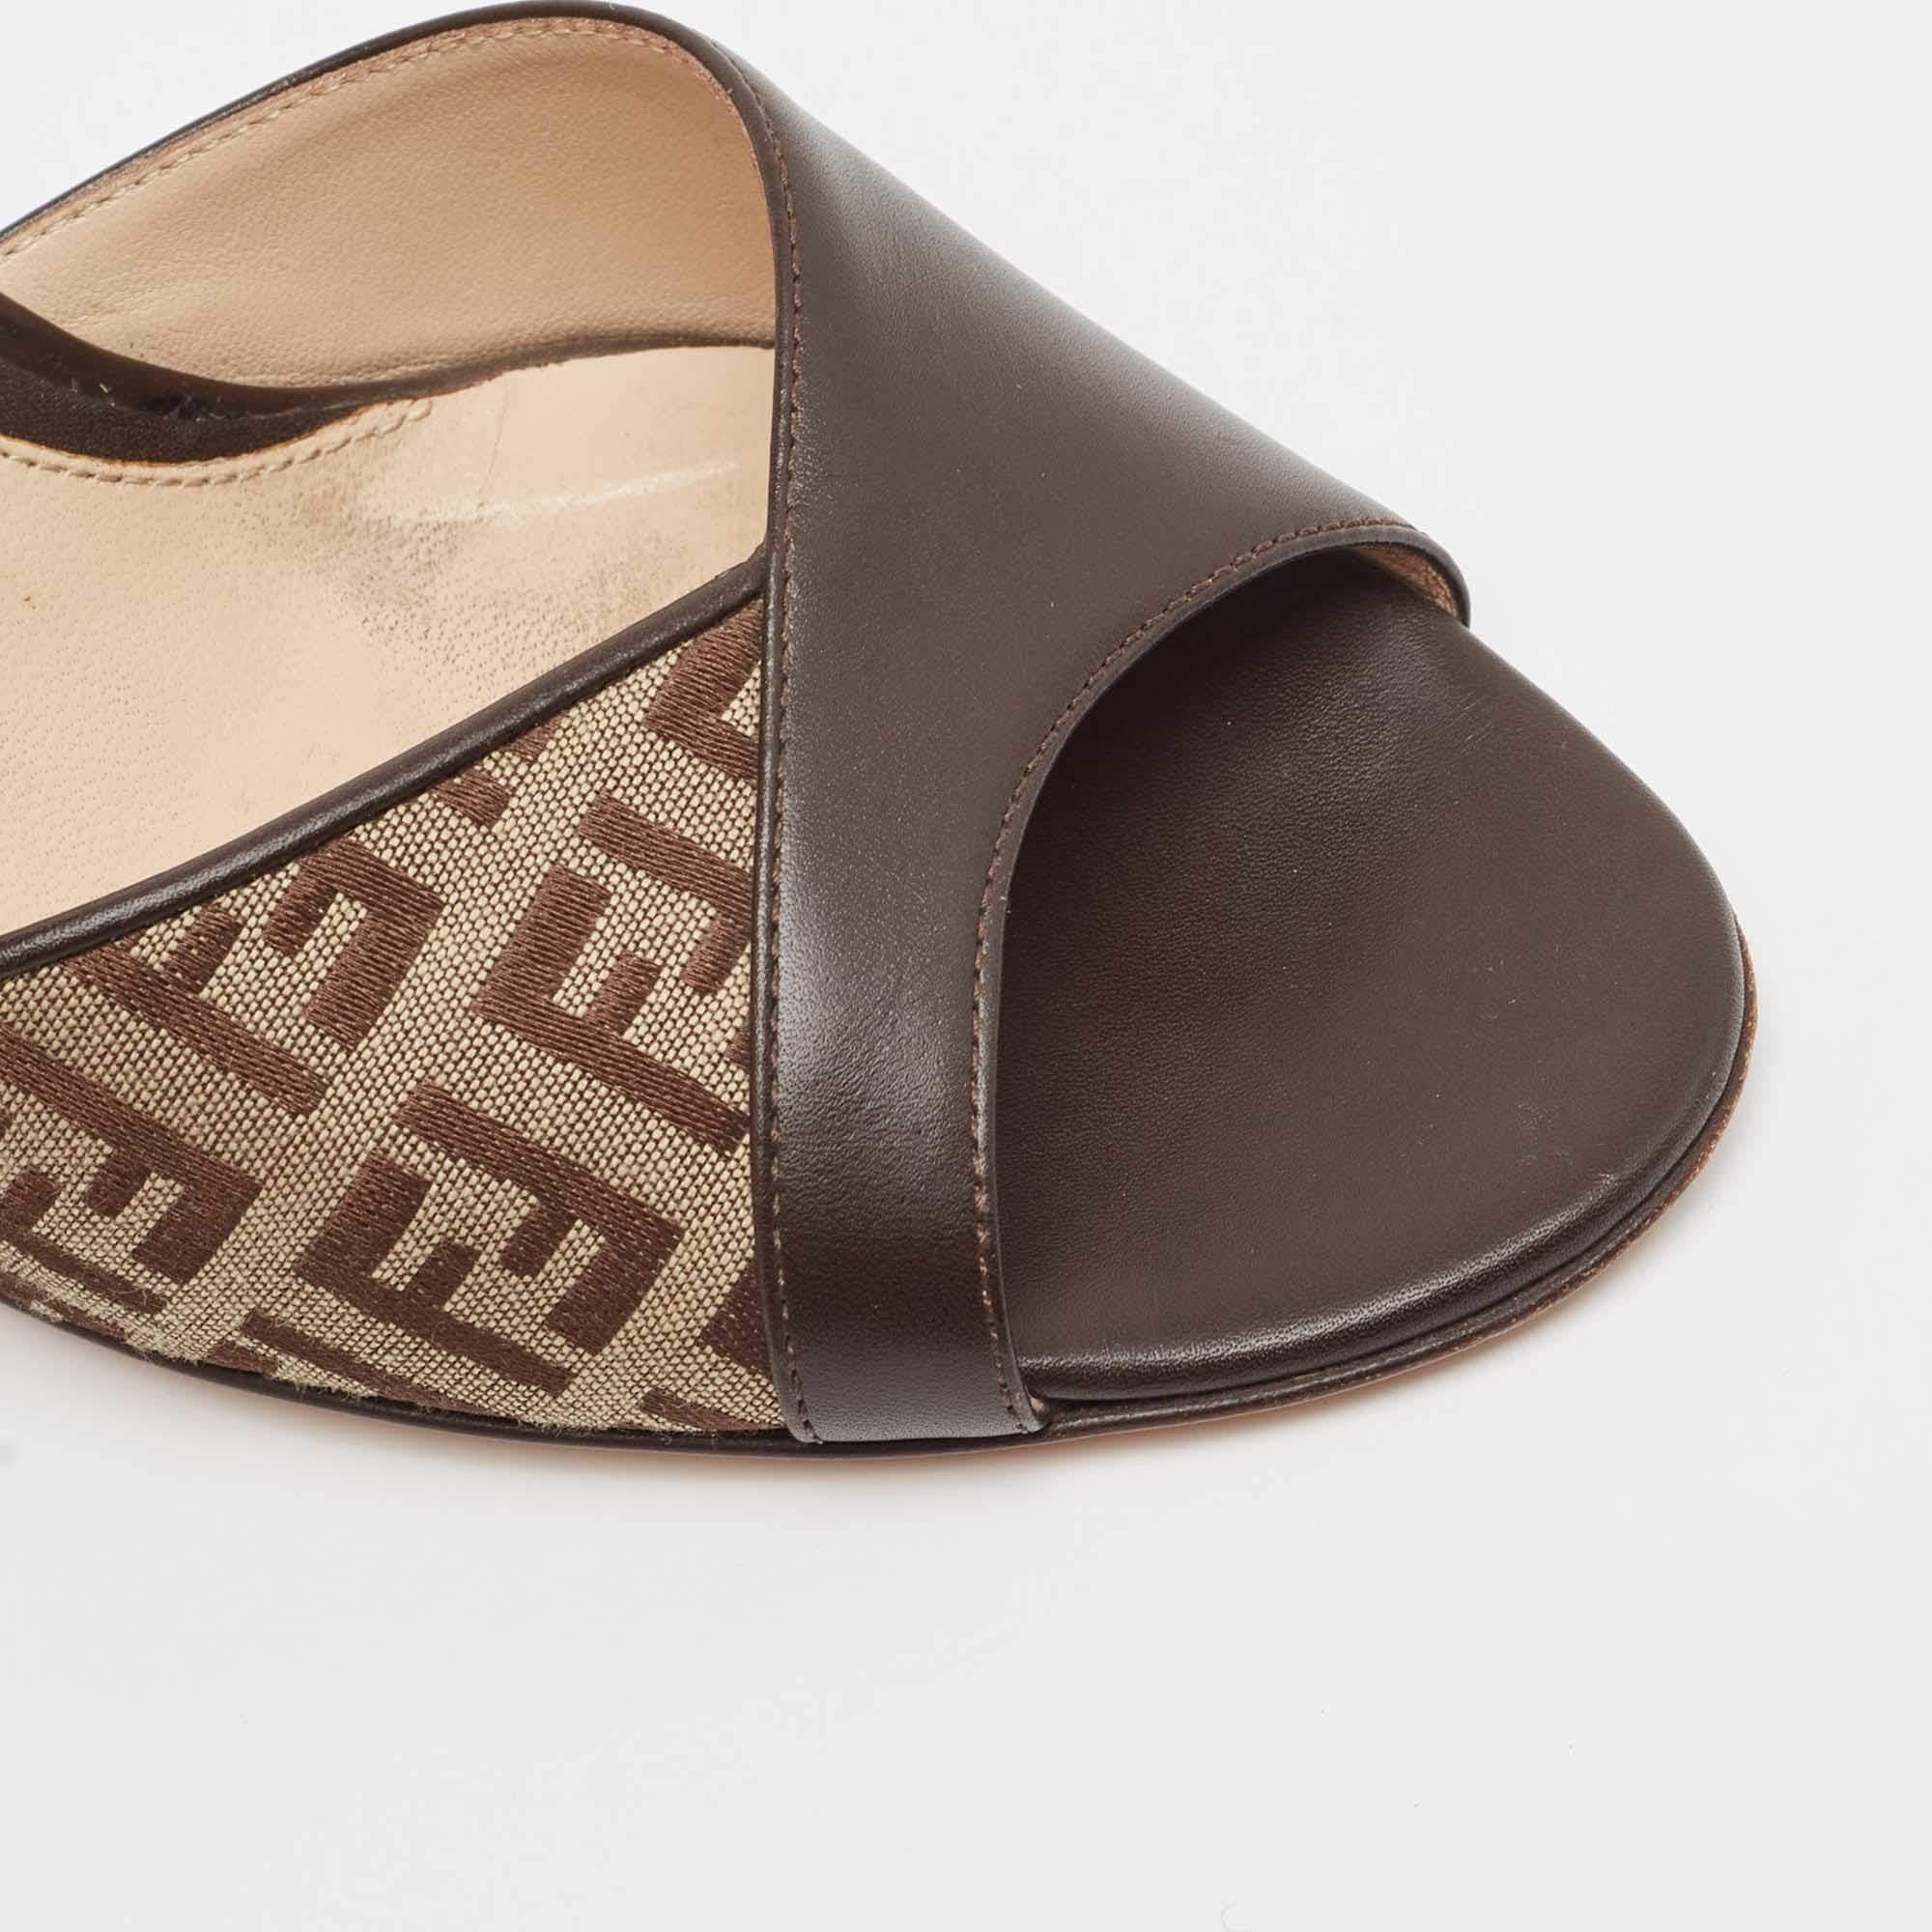 Fendi Brown Leather and Zucca Canvas Mules Size 37 3